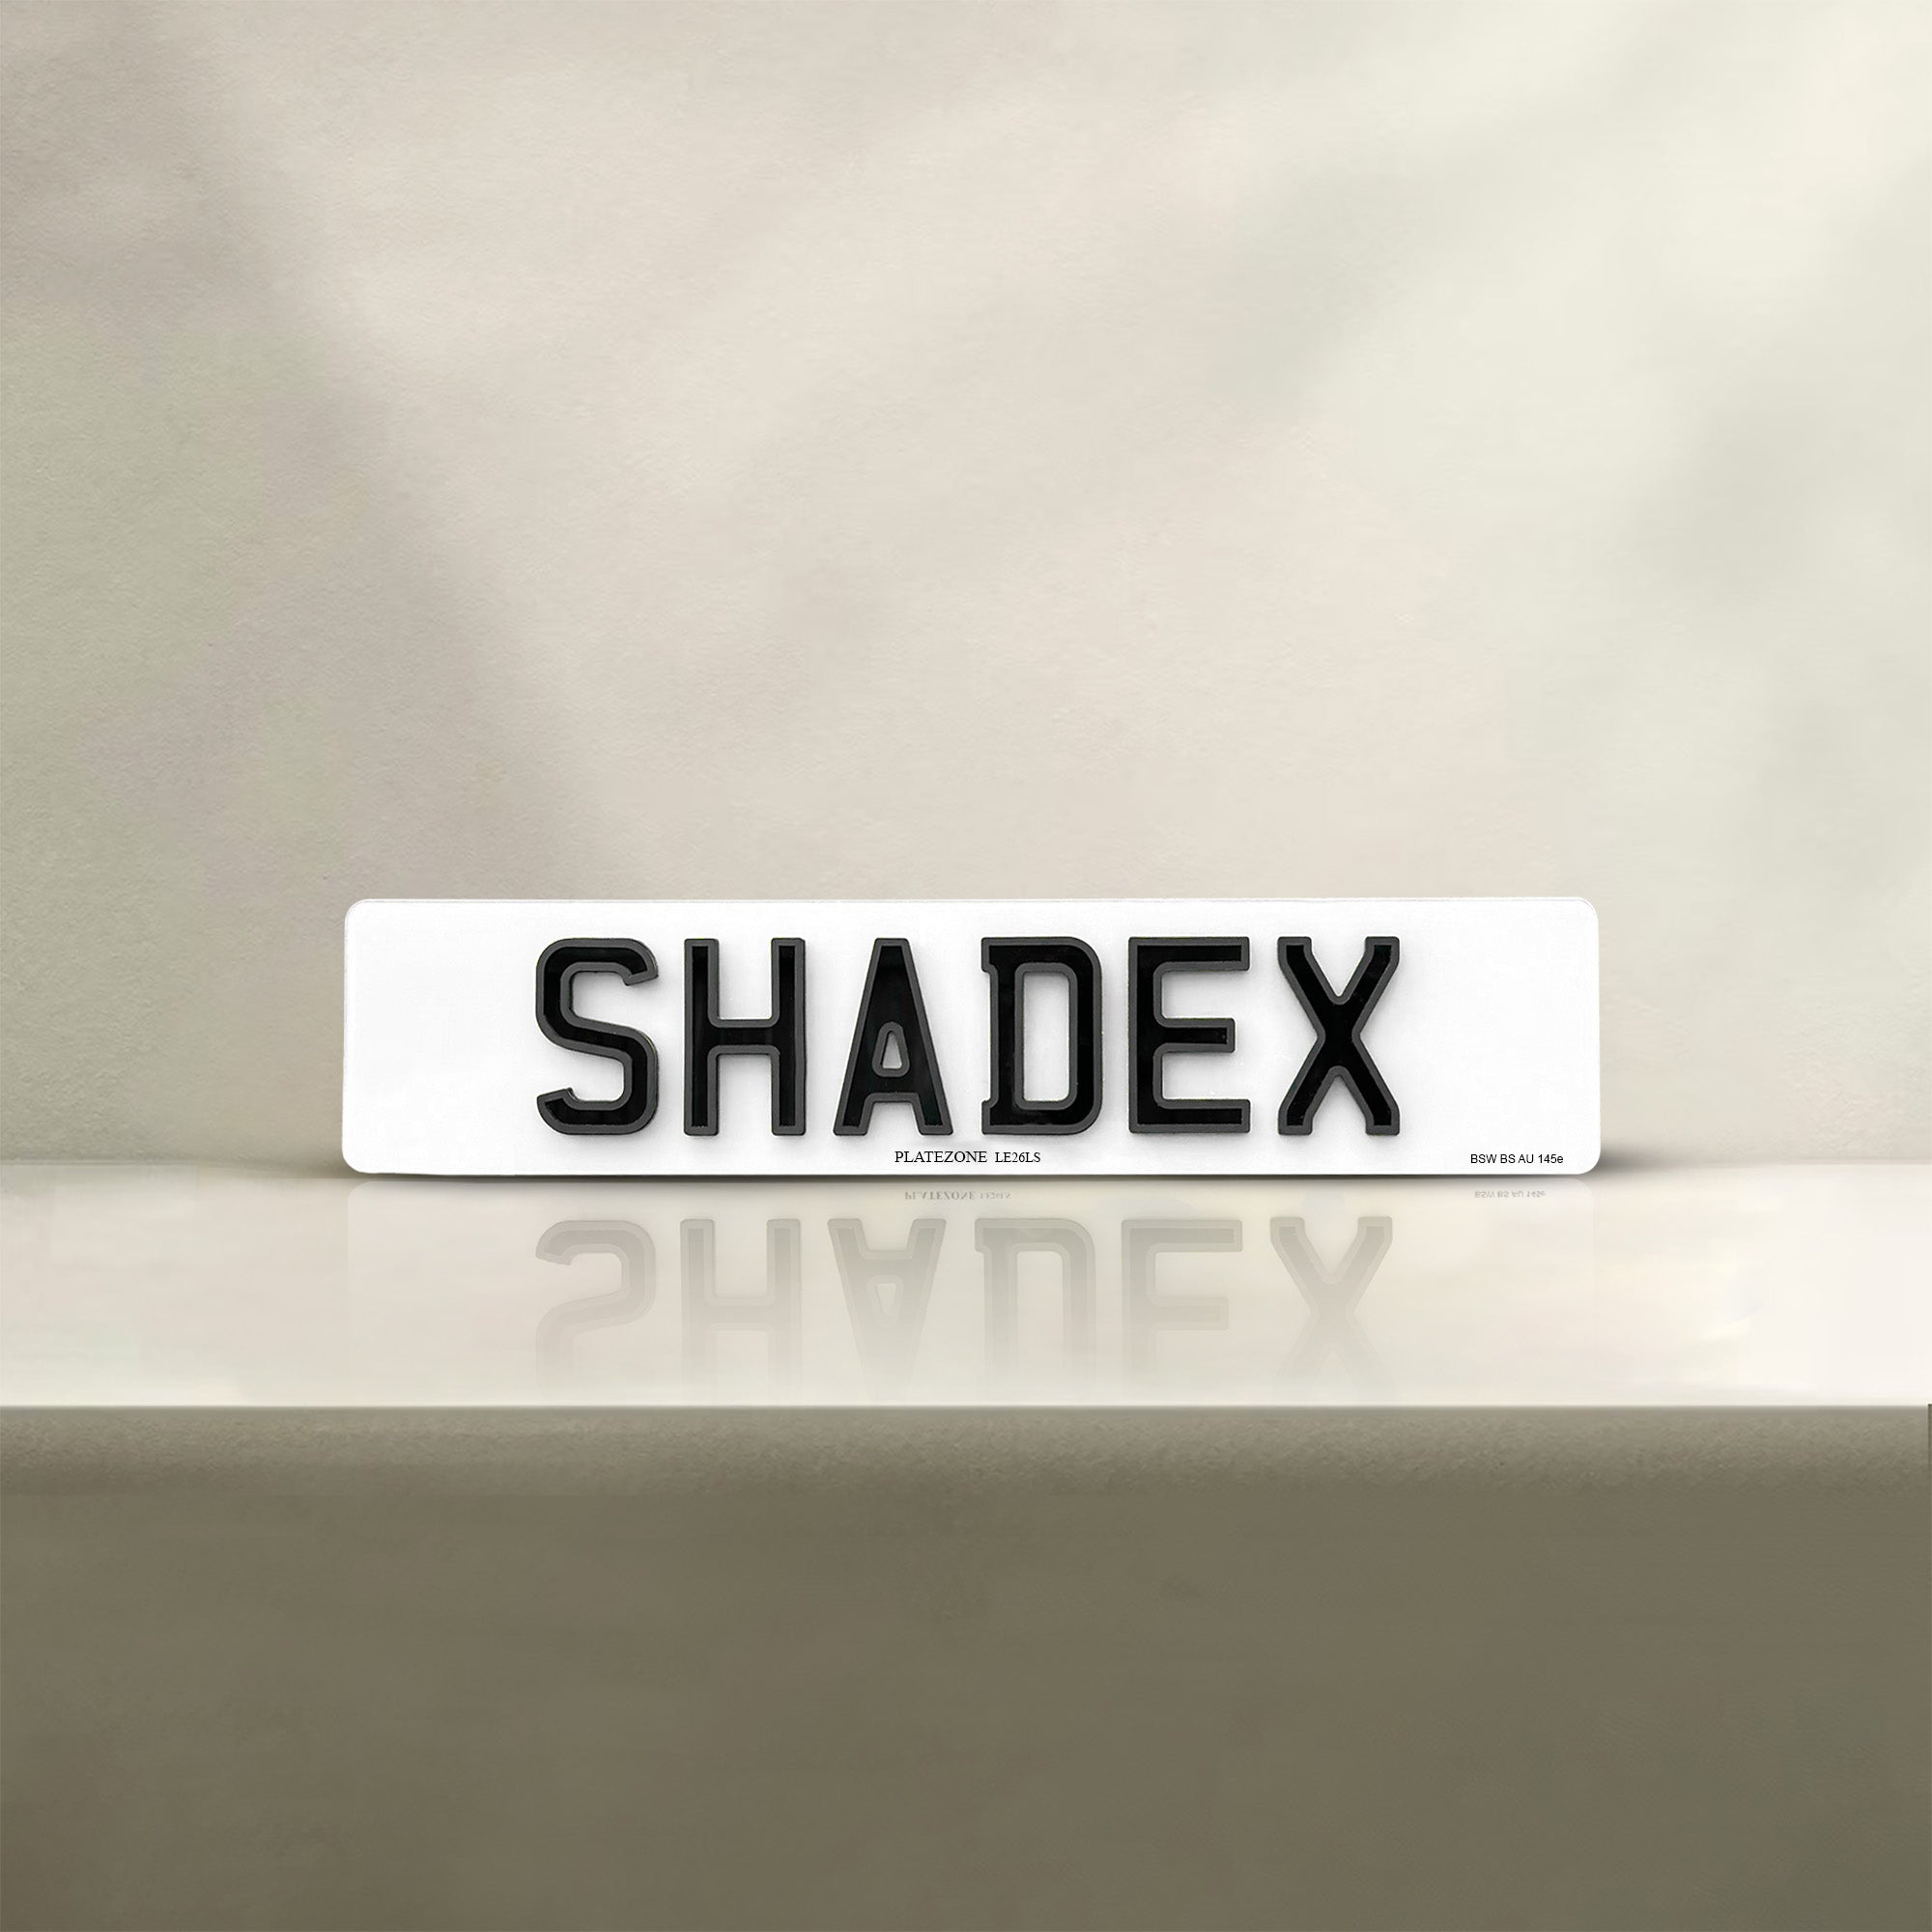 Shadex Number Plate